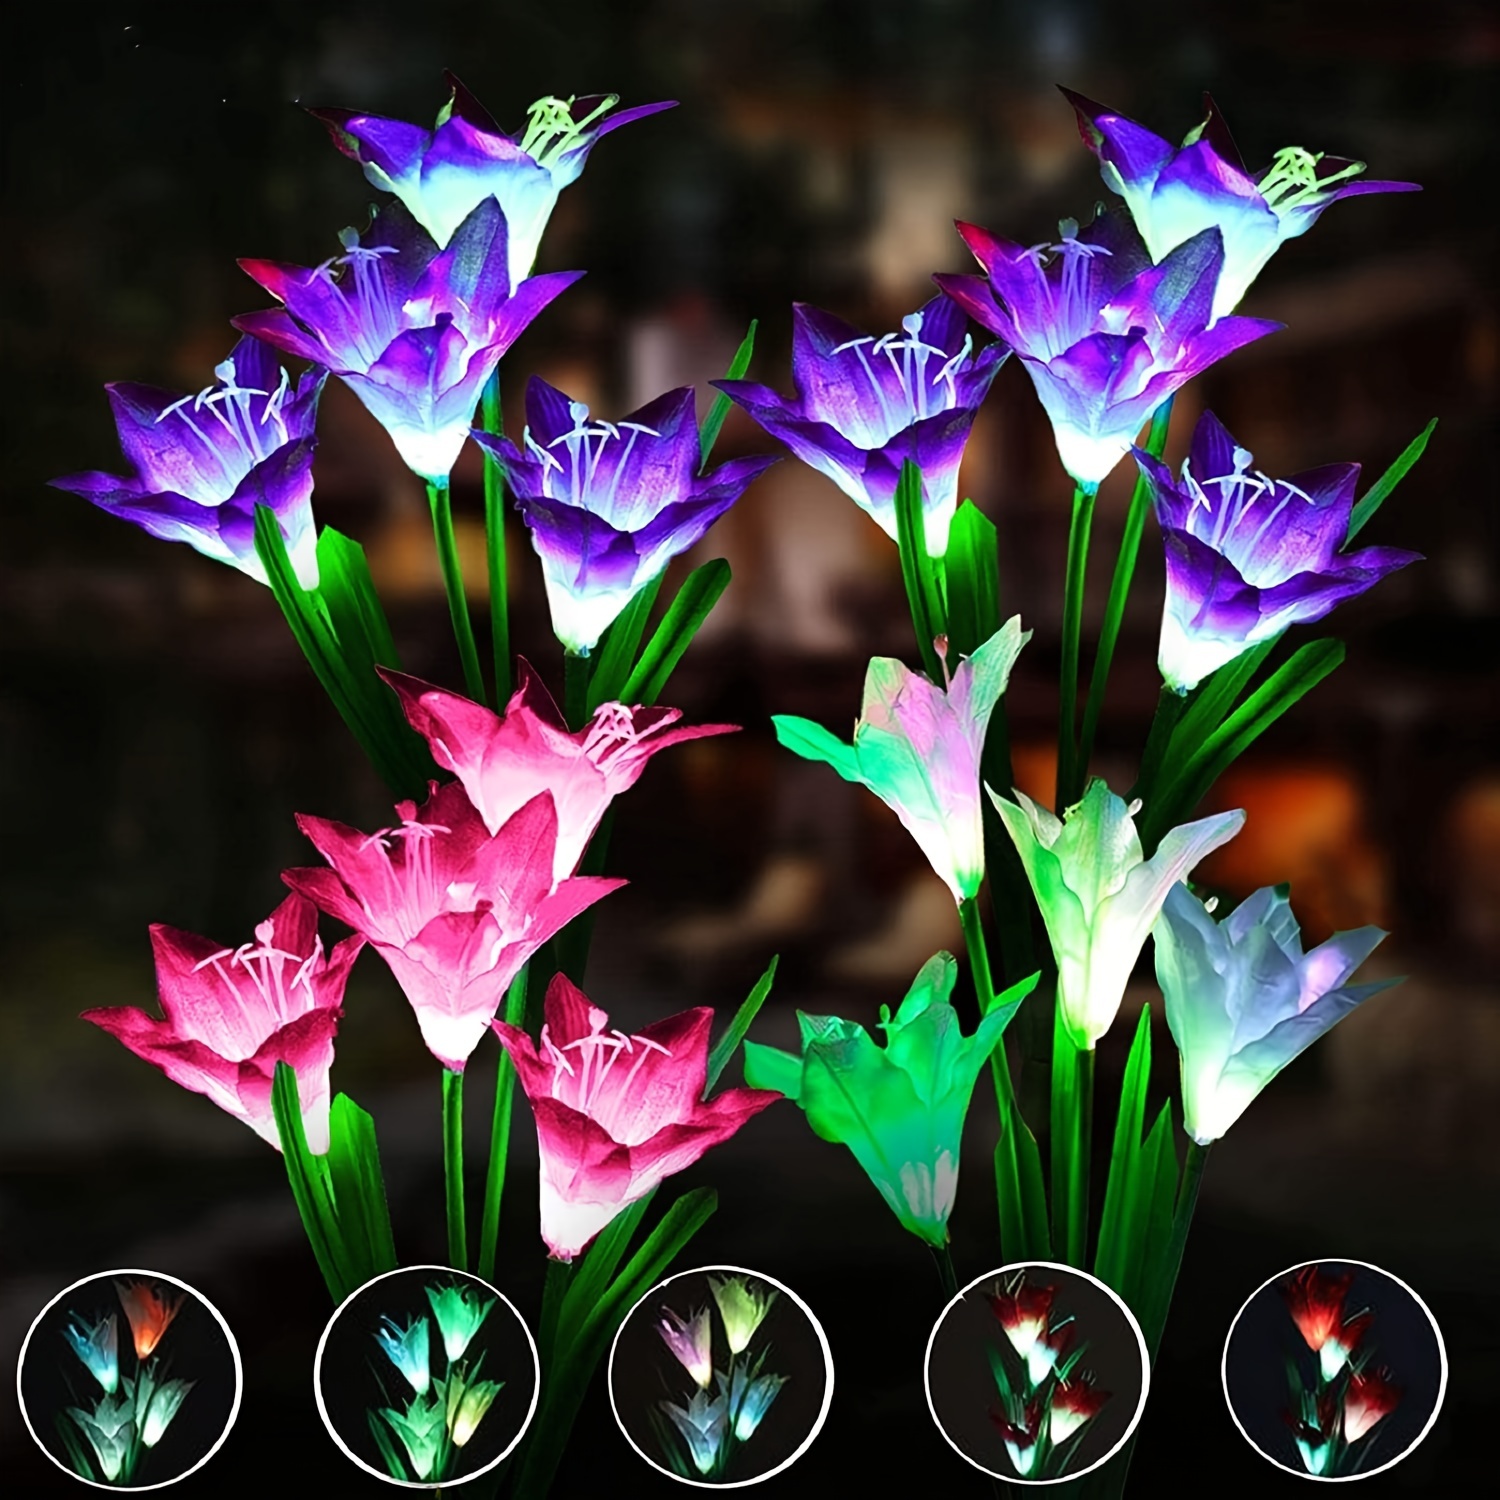 'Savings on 4pcs Solar Flowers Lights Garden Stake Outdoor 16 Head Lily';